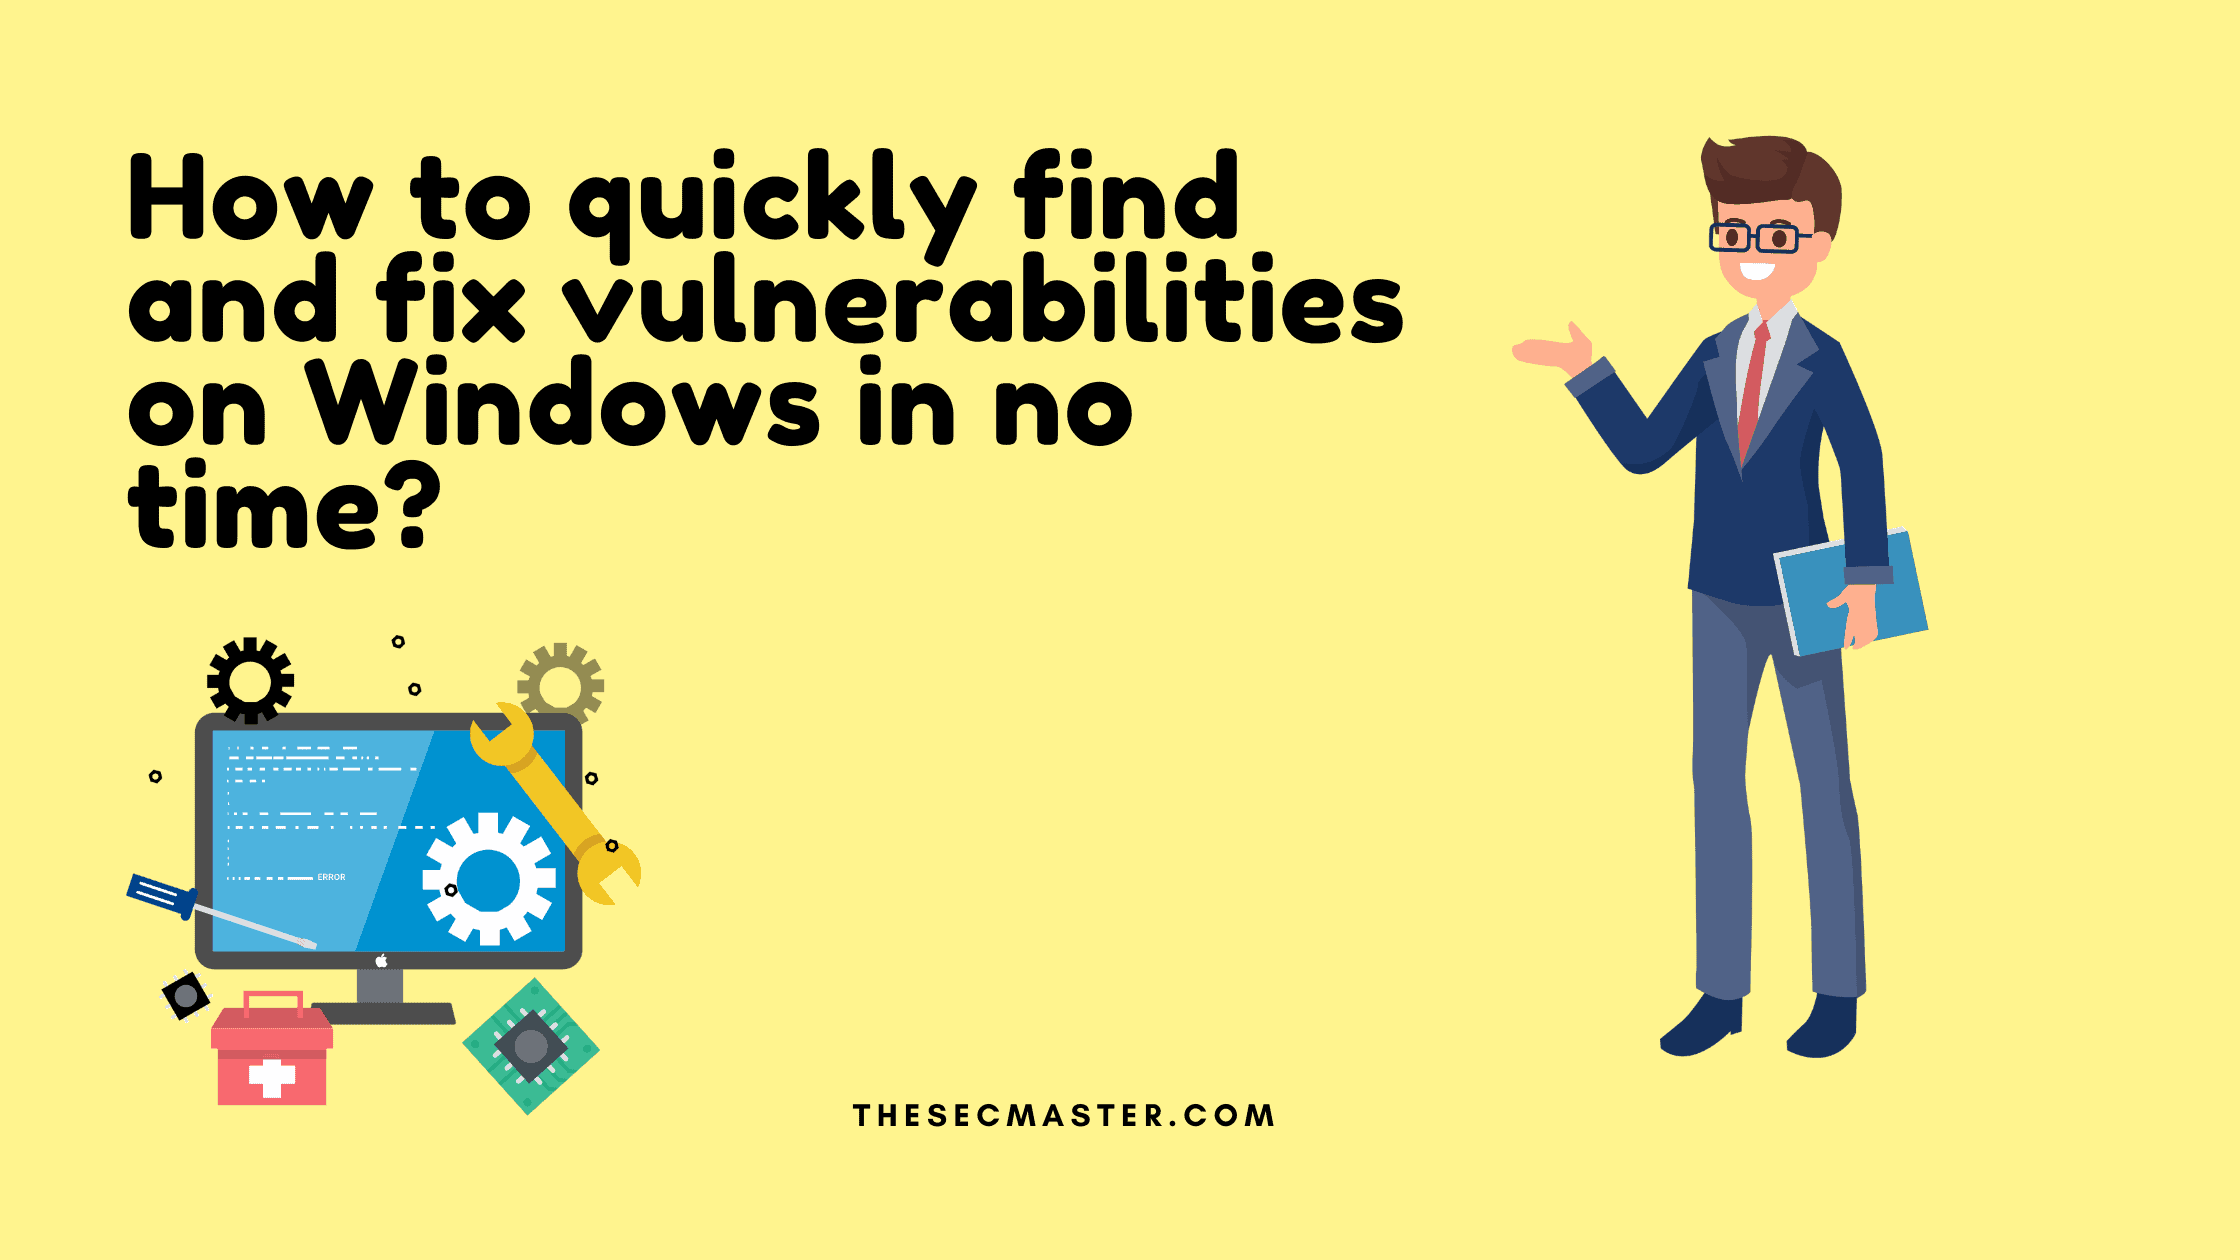 How To Quickly Find And Fix Vulnerabilities On Windows In No Time